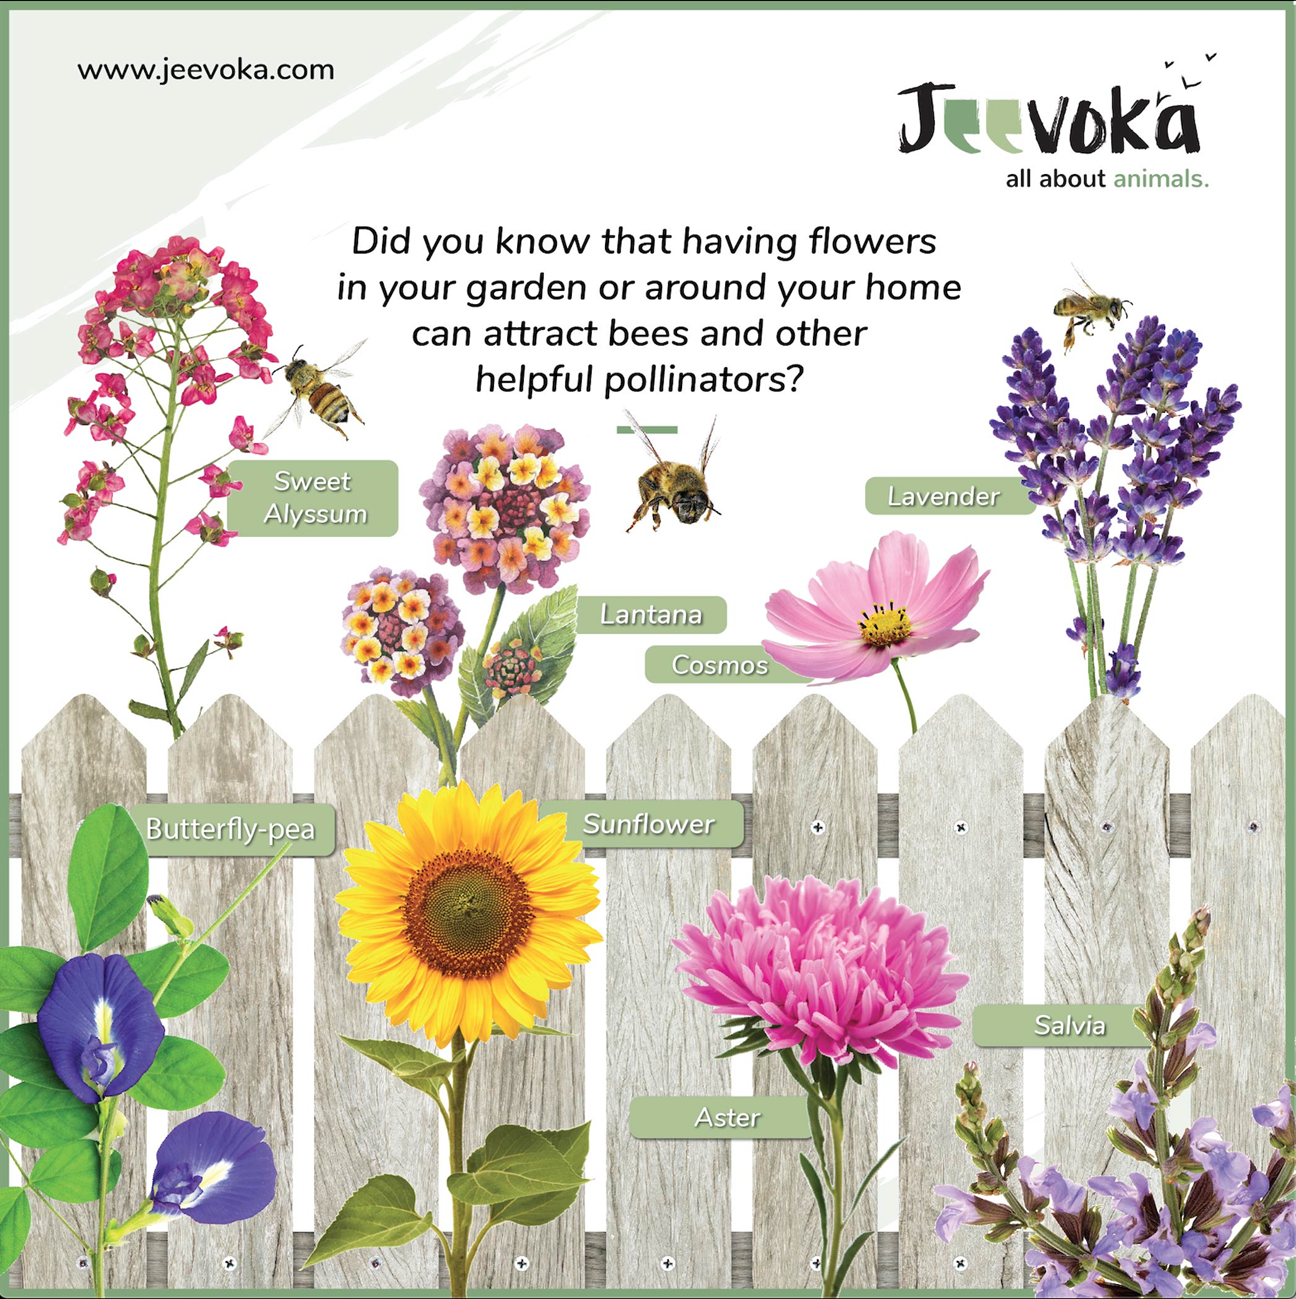 Jeevoka 8 Plants That Attract Bees And Other Pollinators To Your Home Gardens